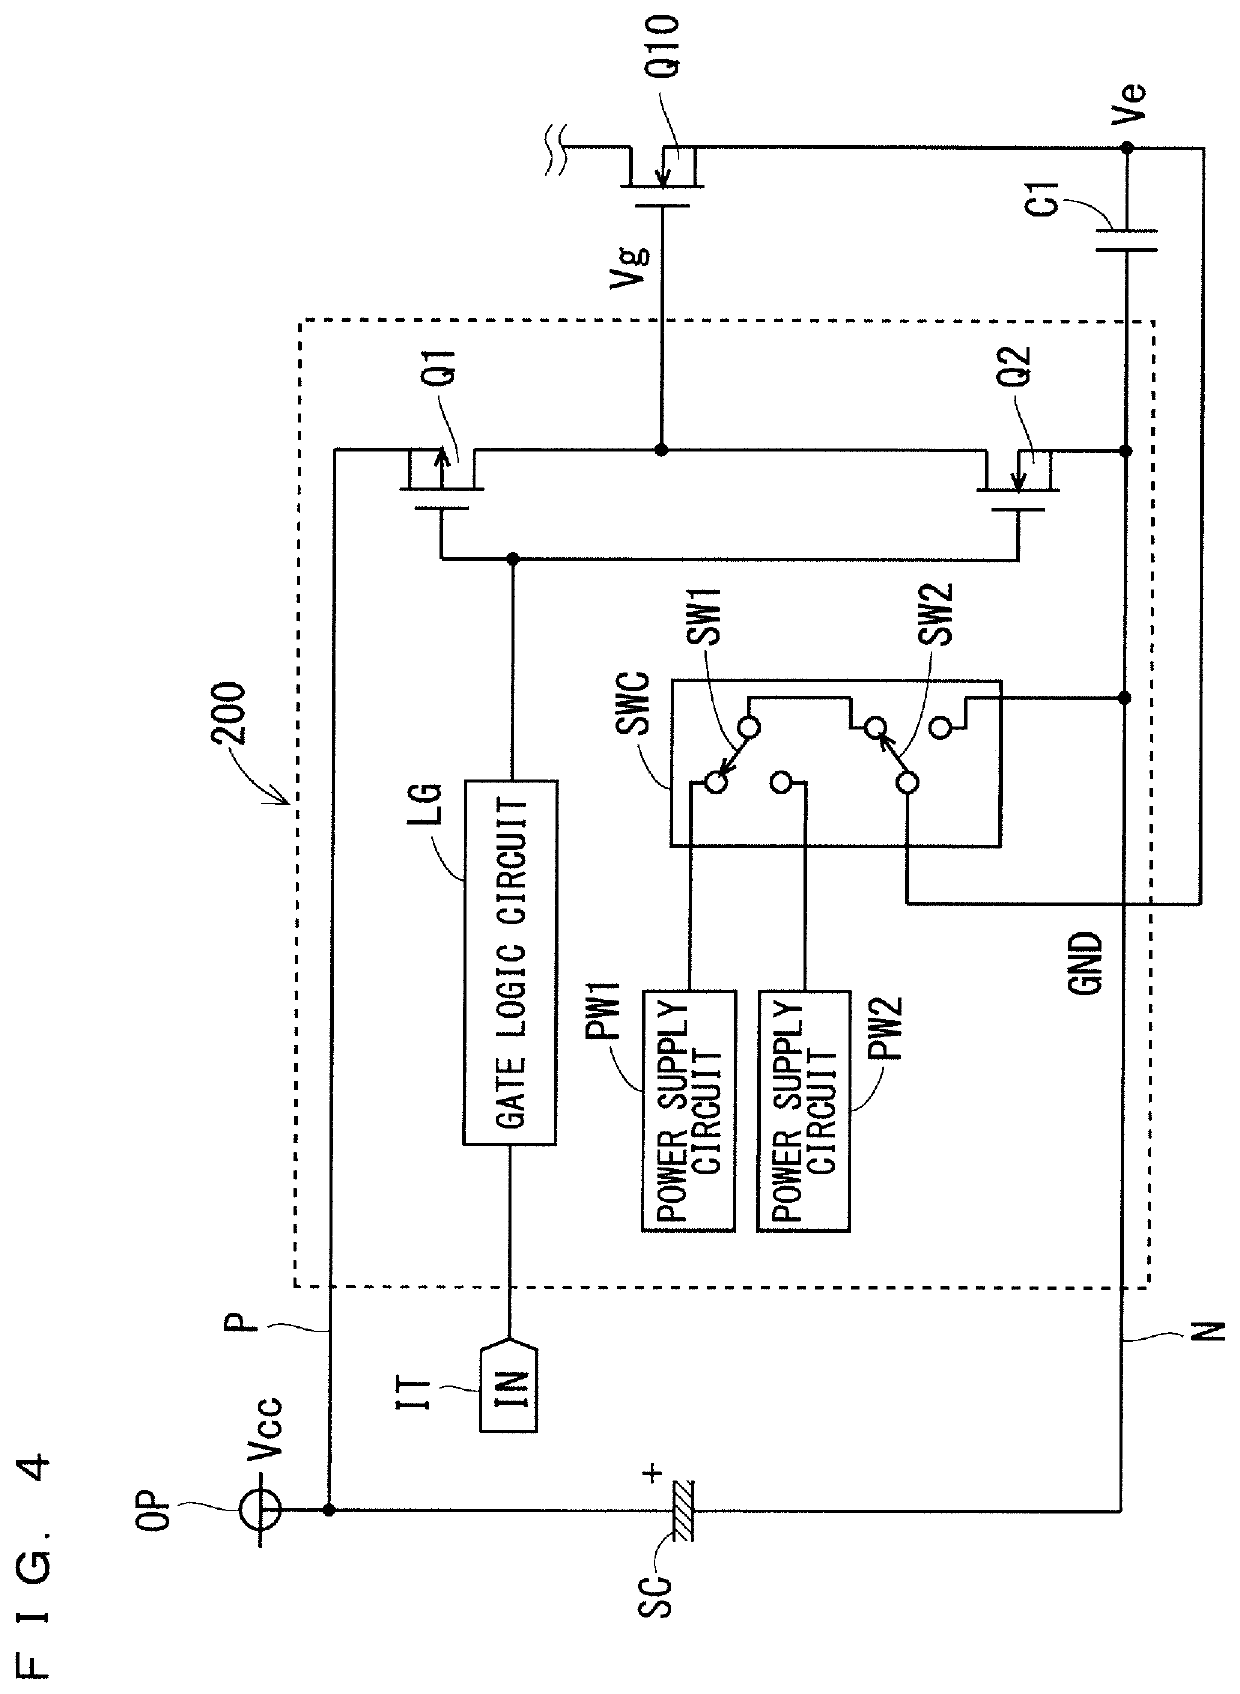 Gate driver and semiconductor module